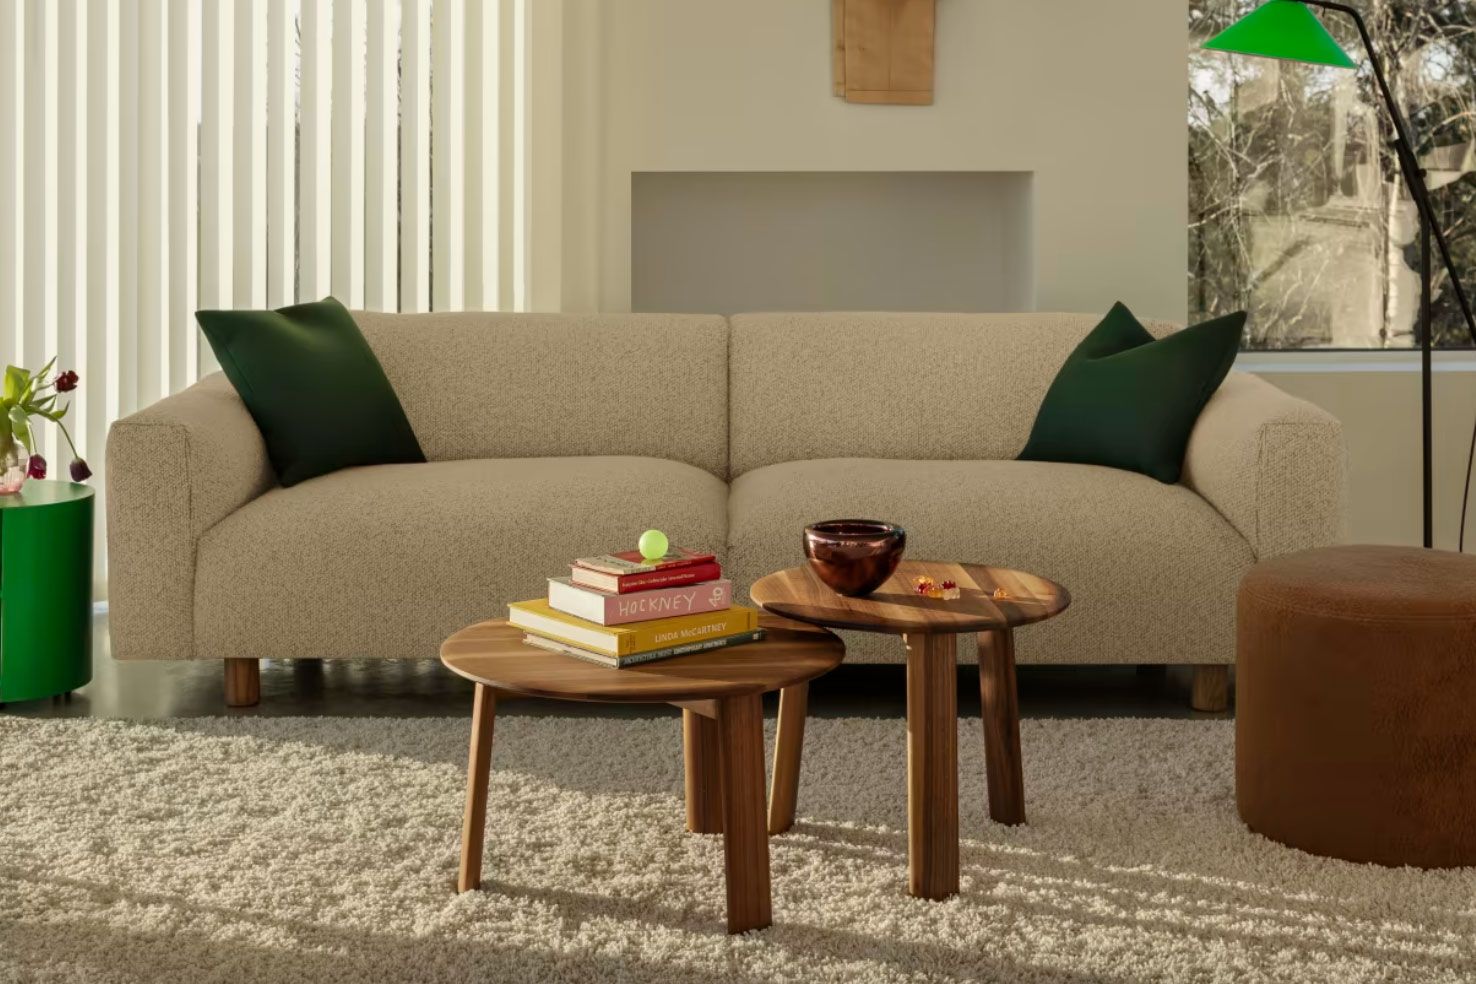 How to Pick A Coffee Table for Sectional